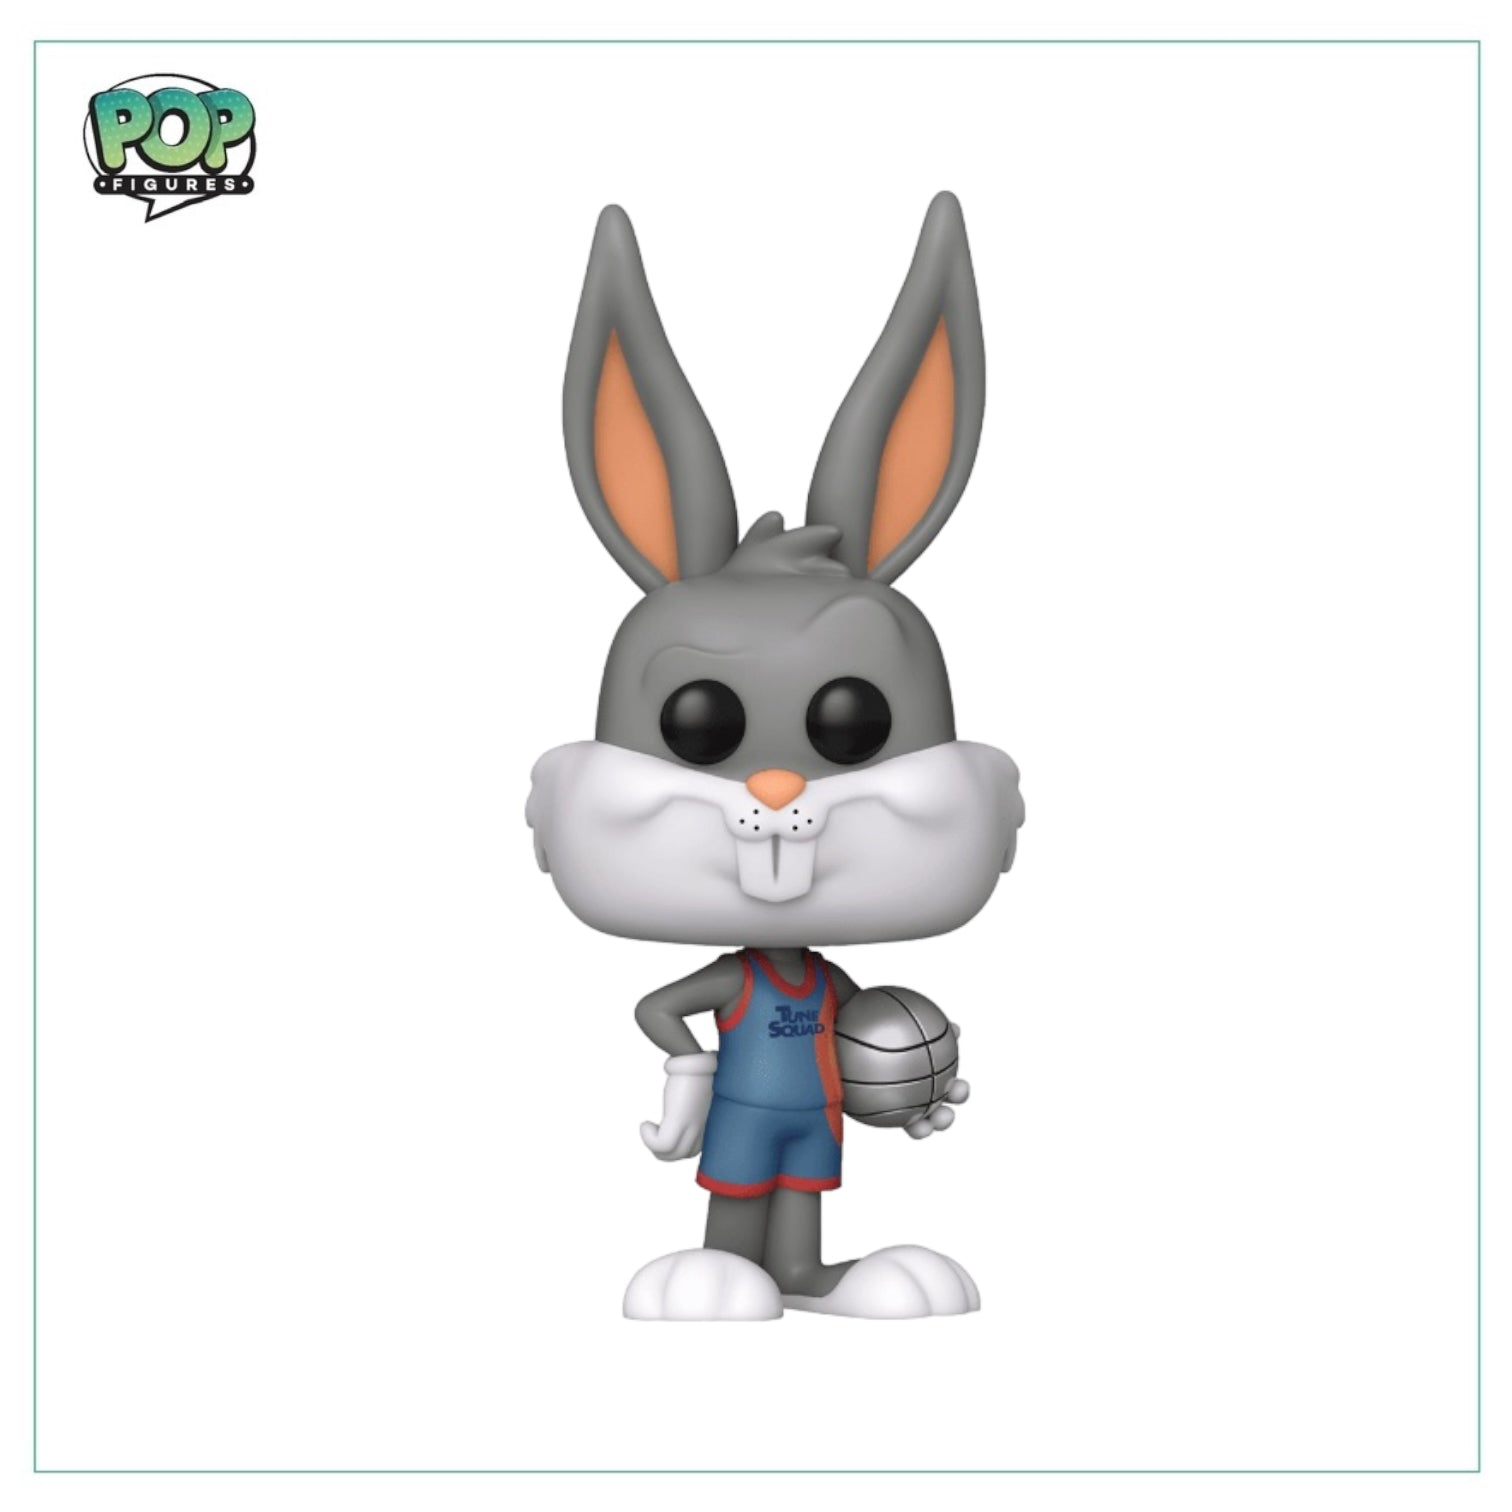 Bugs Bunny #1060 Funko Pop! - Space Jam: A New Legacy